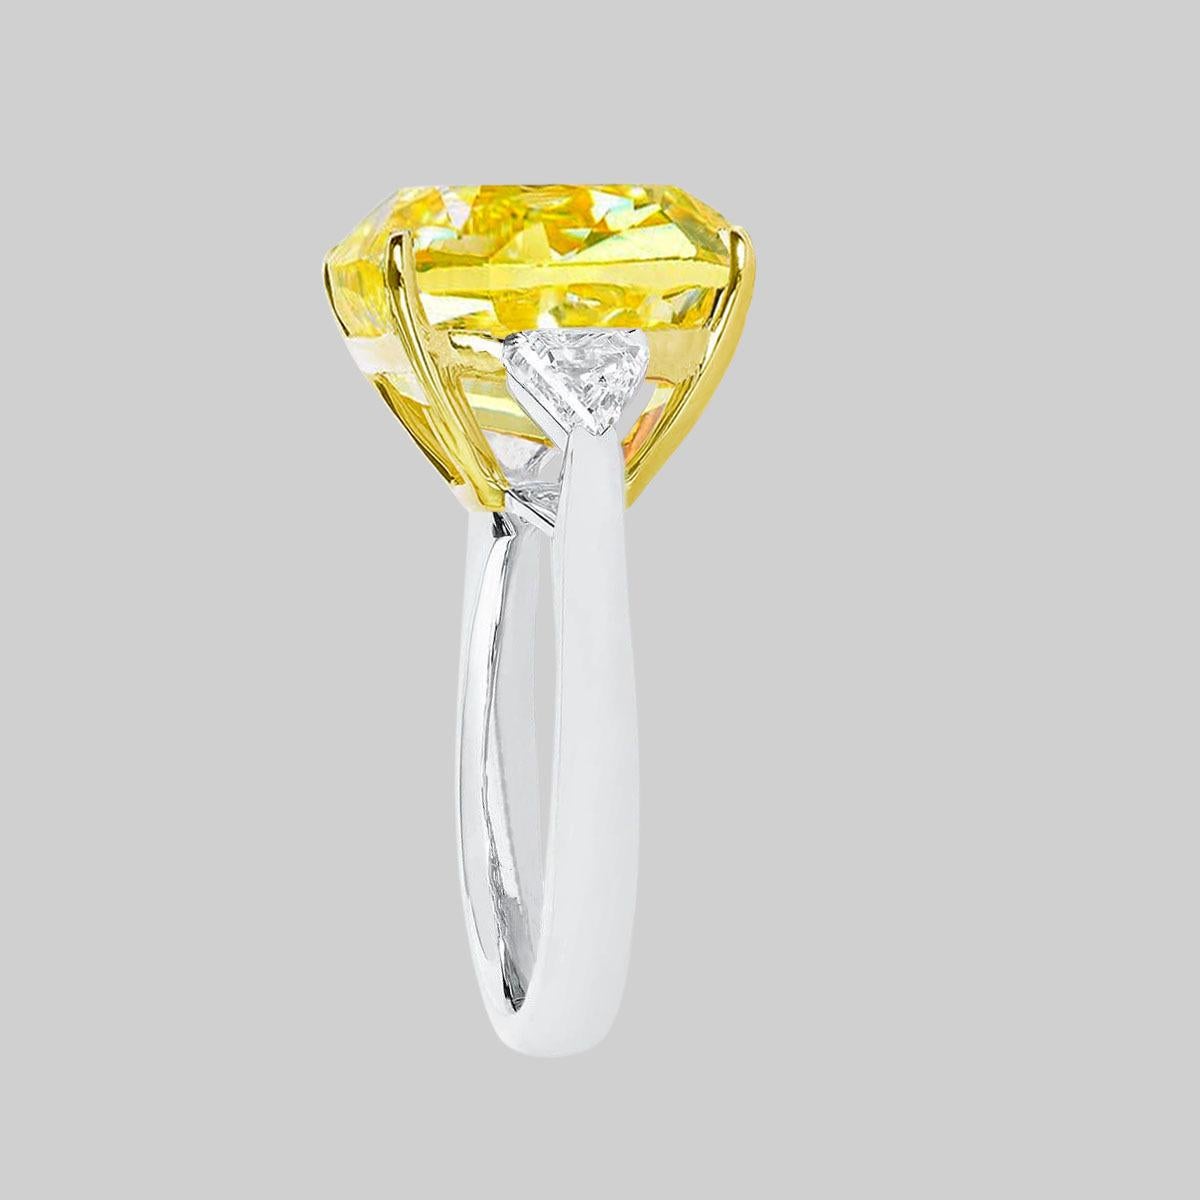 Stunning GIA certified fancy VIVID yellow cushion cut diamond ring with two side trillion natural diamonds at each side mounted in 18 carats yellow gold and white gold.

The main stone sparkle is a very strong yellow is a vivid color!


